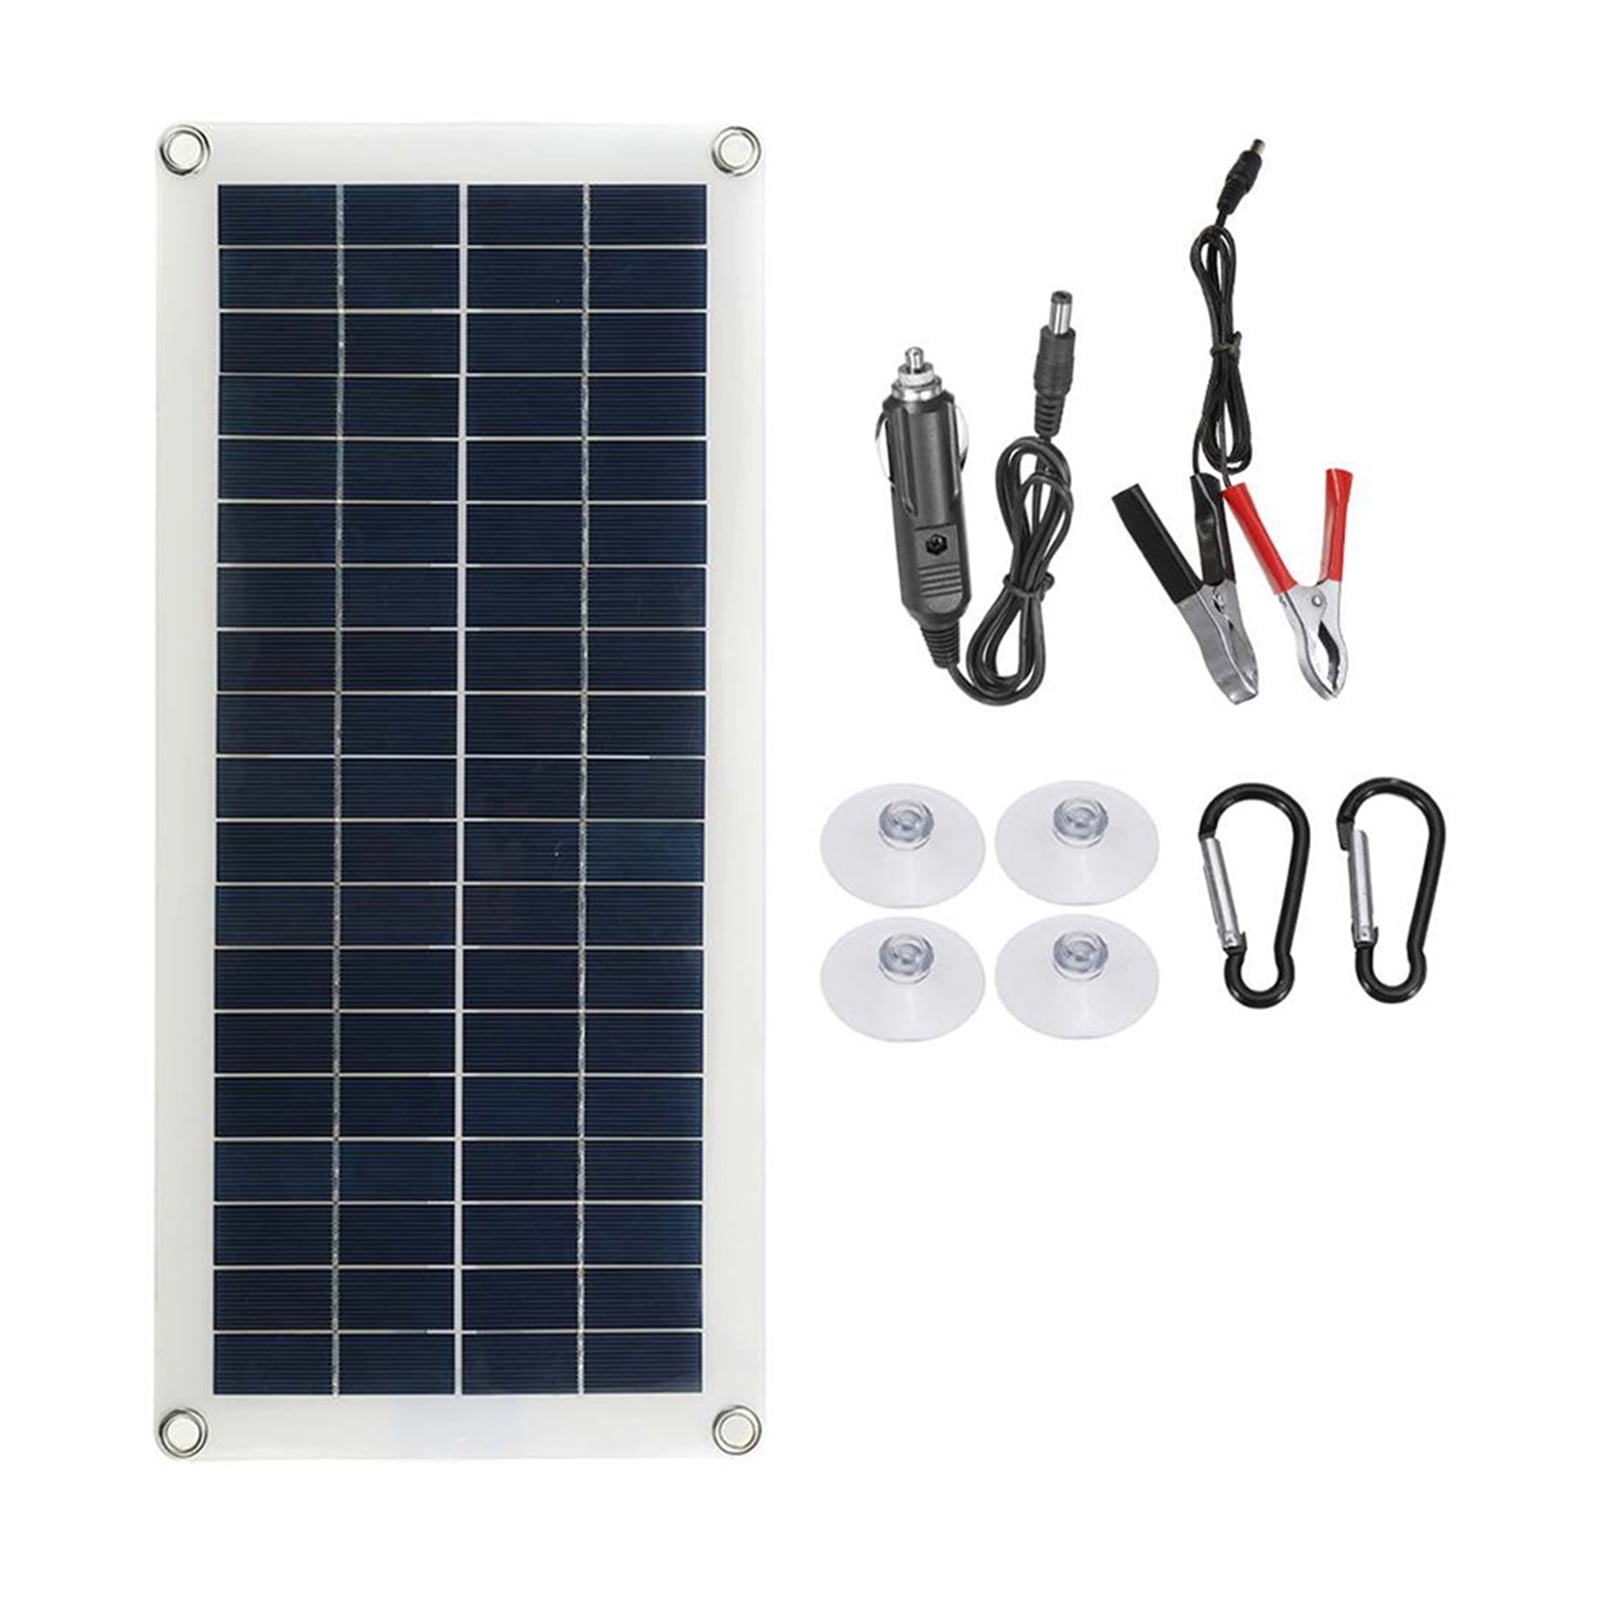 Details about   100W 12V Portable Solar Panel Kit Supply For Phone/Power station/Camping/RV 